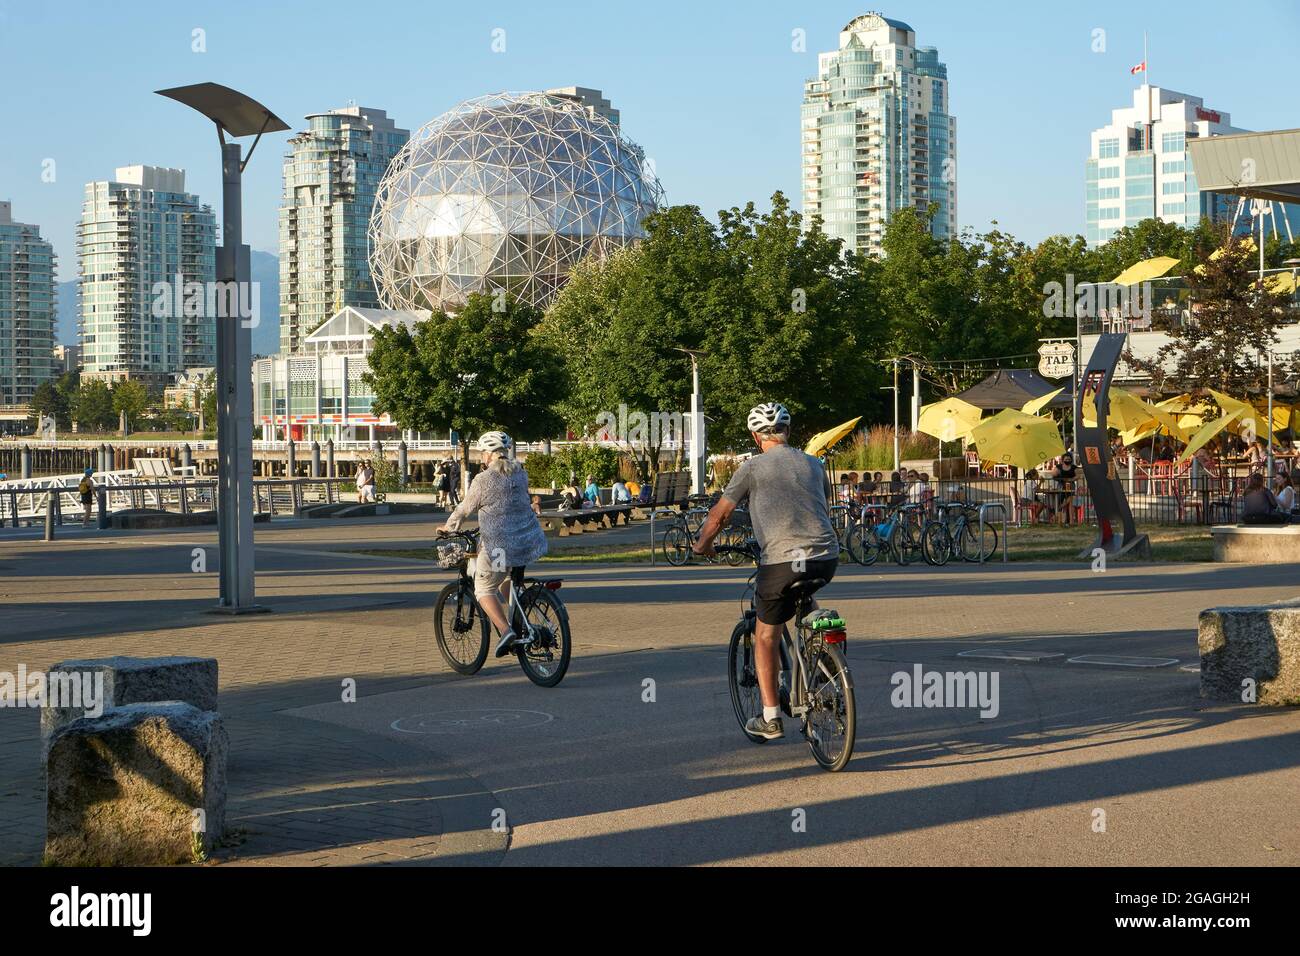 Senior man and woman riding their bicycles in the Village at False Creek, Vancouver, British Columbia, Canada Stock Photo